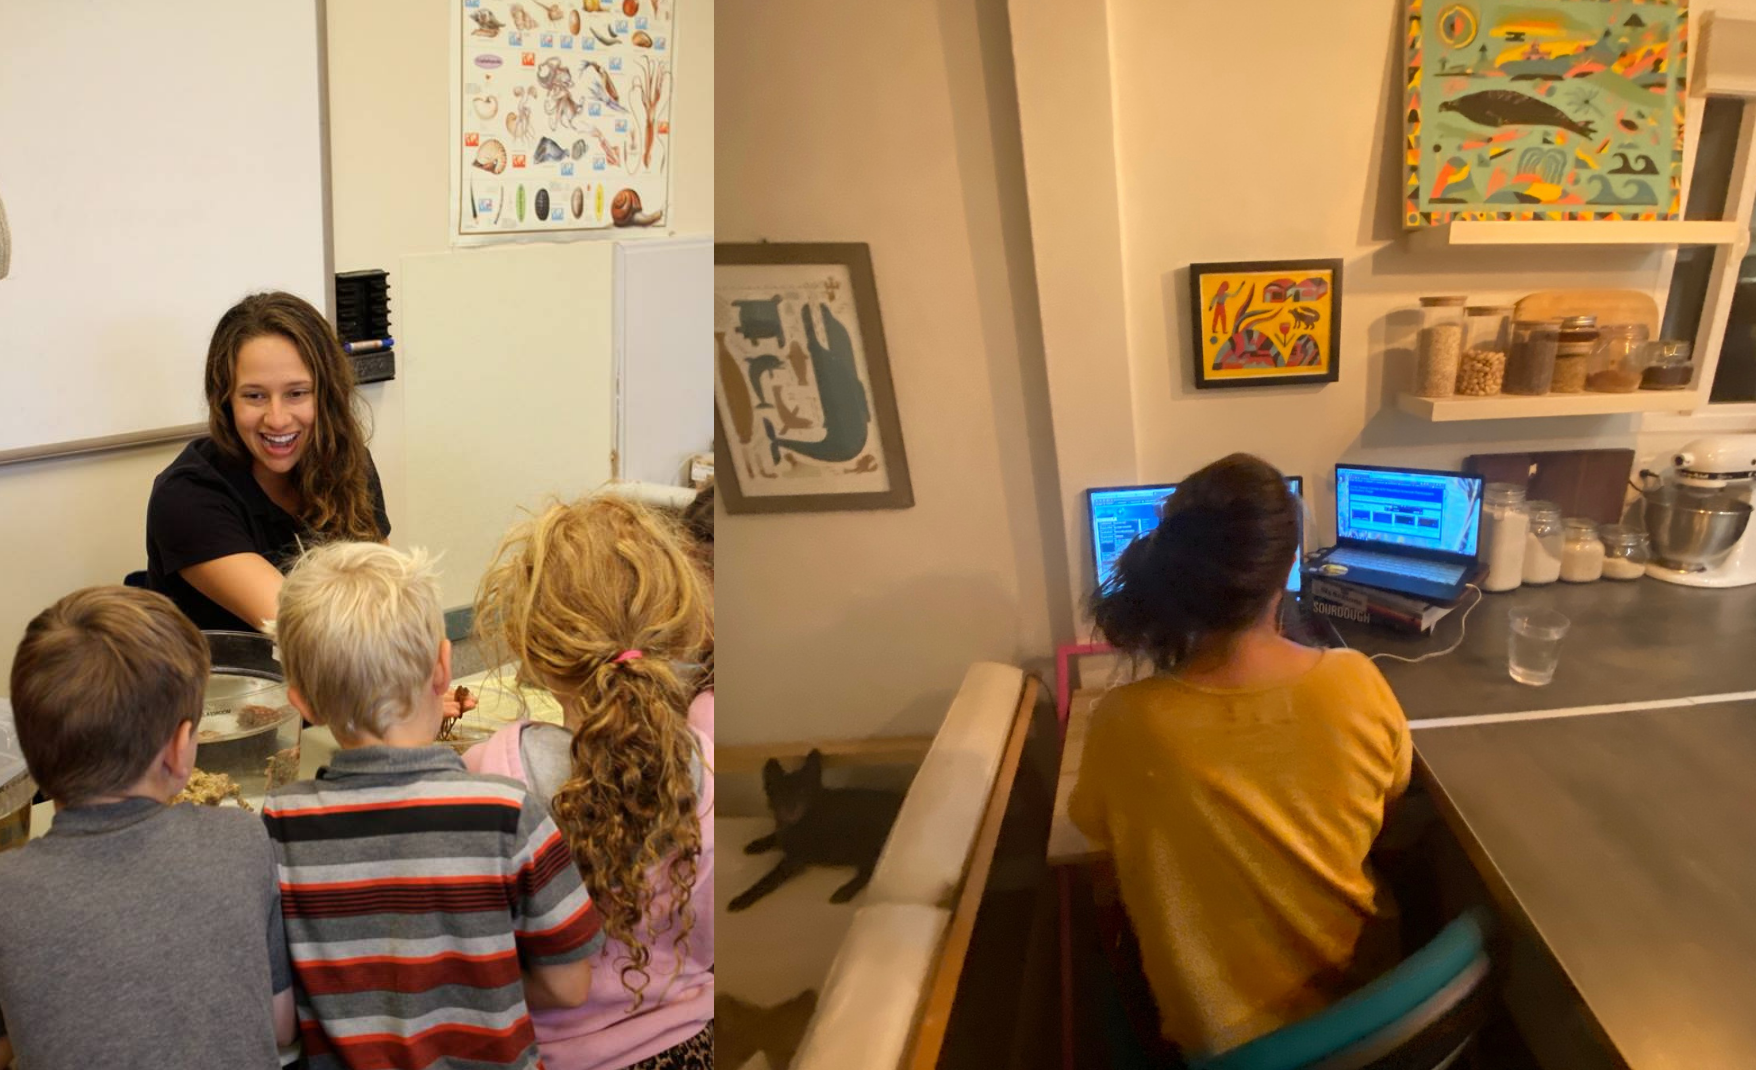 A side-by-side comparison between hands-on marine science education (pre-covid), and what at-home virtual STEM education looks like.